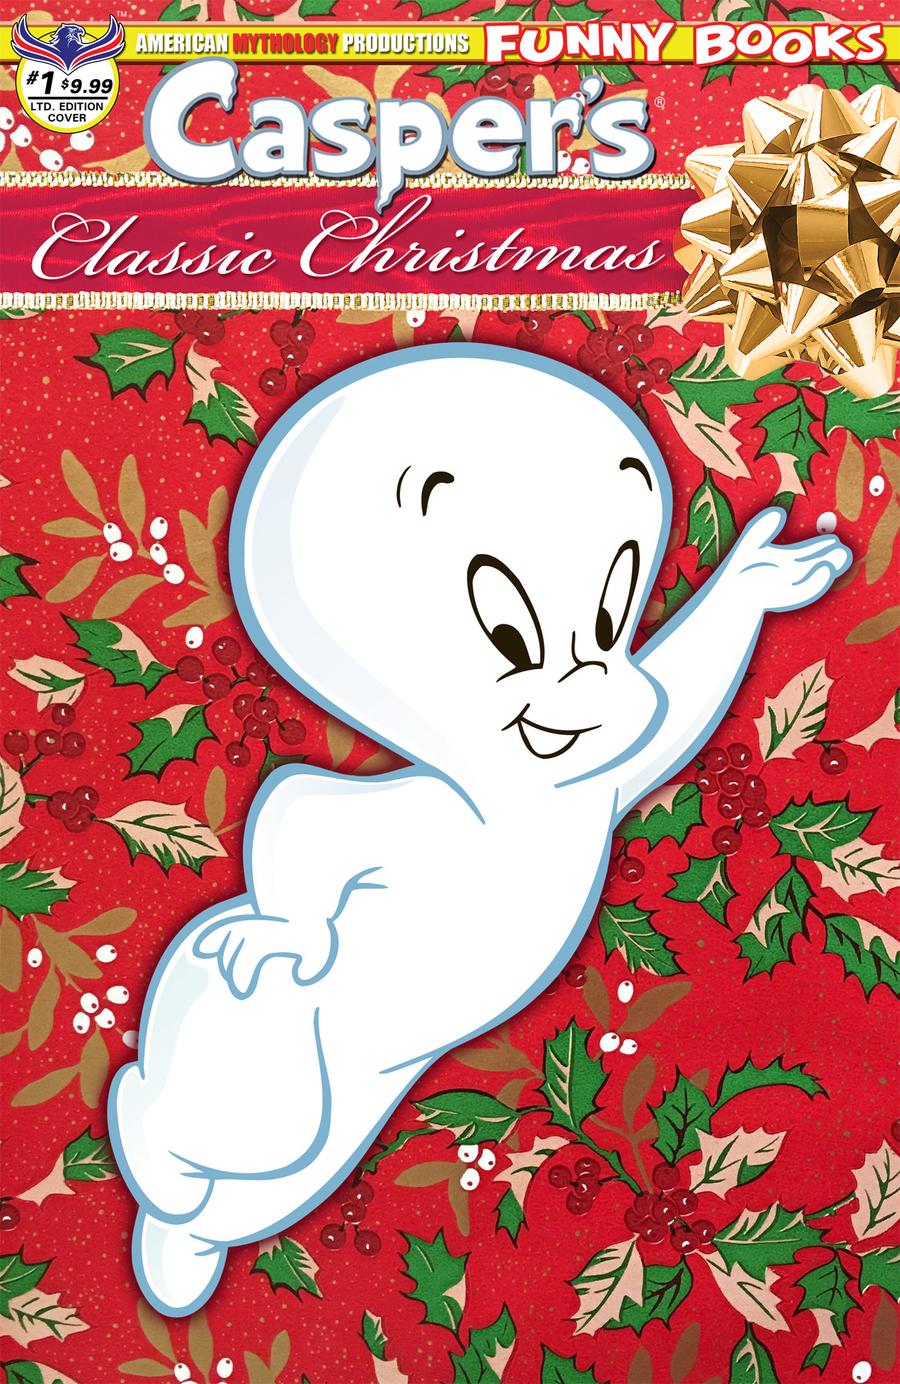 Caspers Classic Christmas #1 Cover B Limited Edition Retro Animation Variant Cover